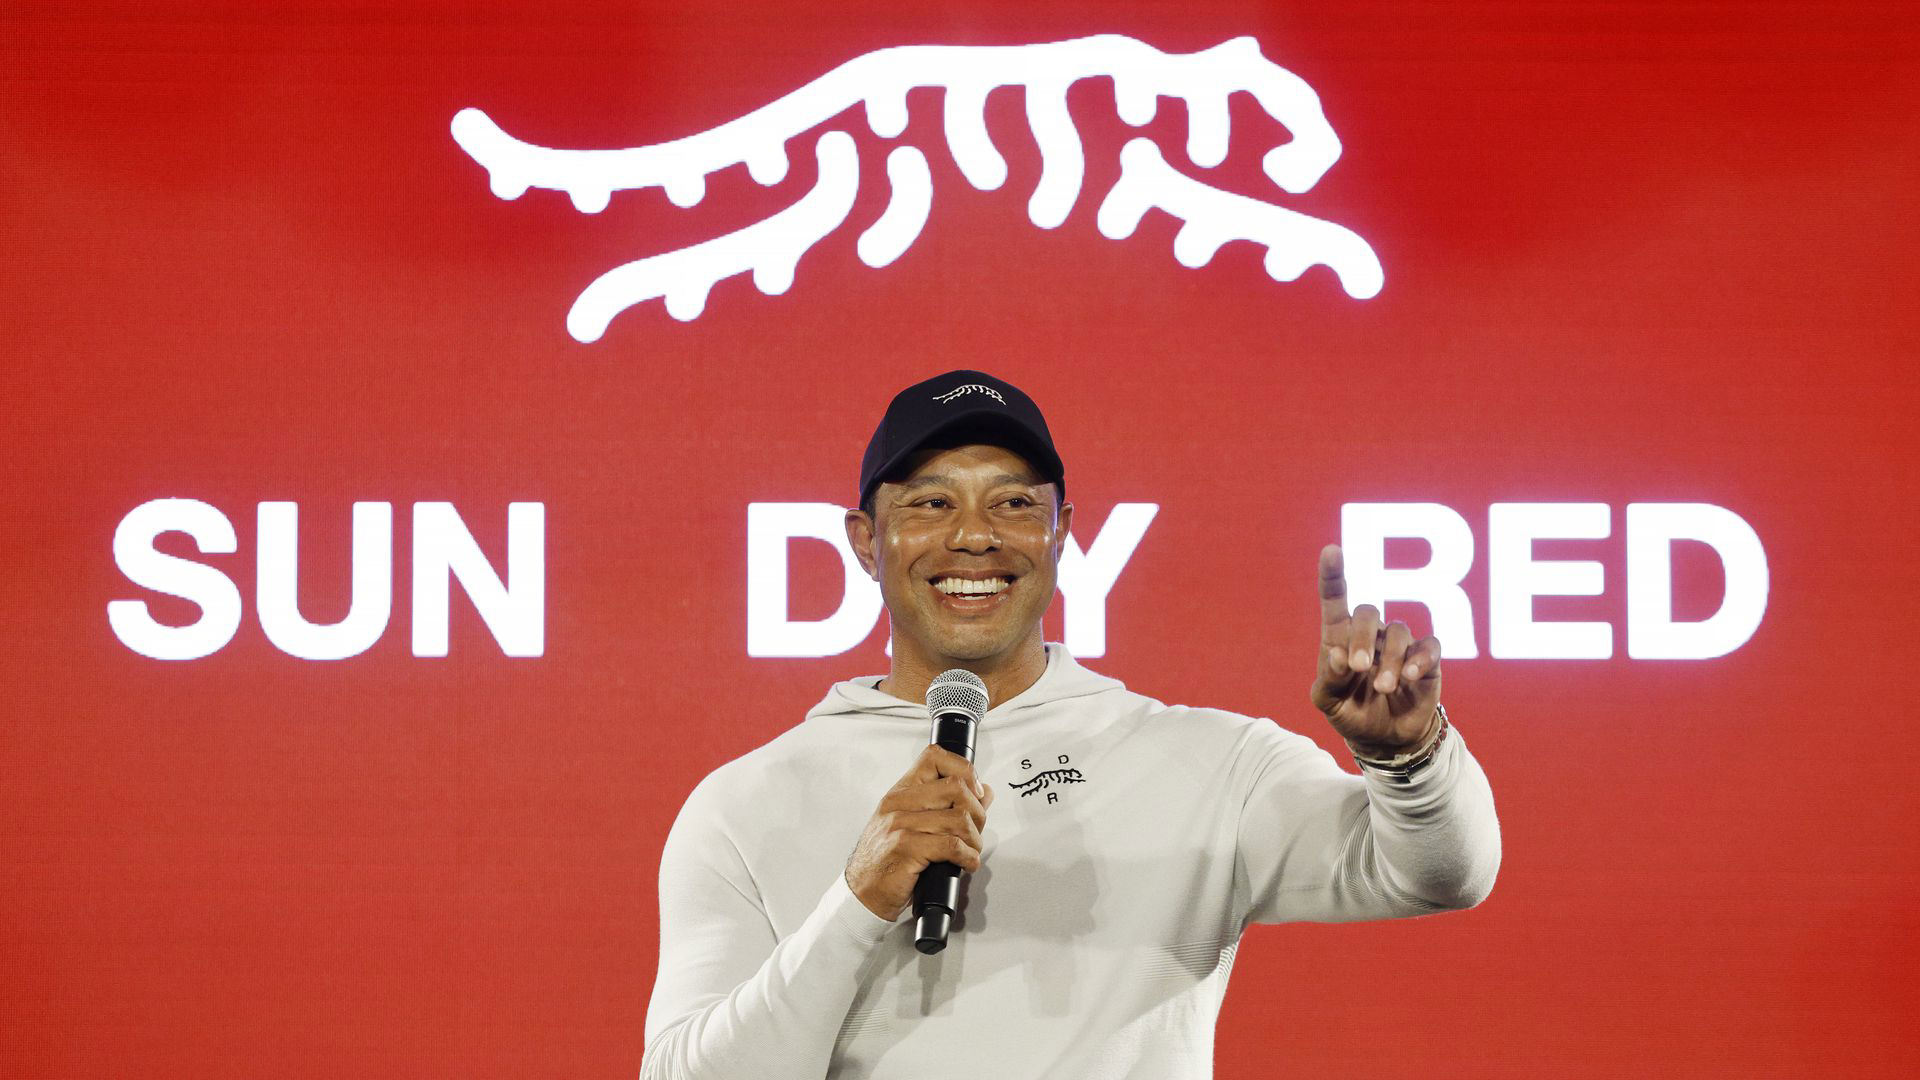 Tiger Woods unveils Sun Day Red apparel line alongside Taylormade Golf